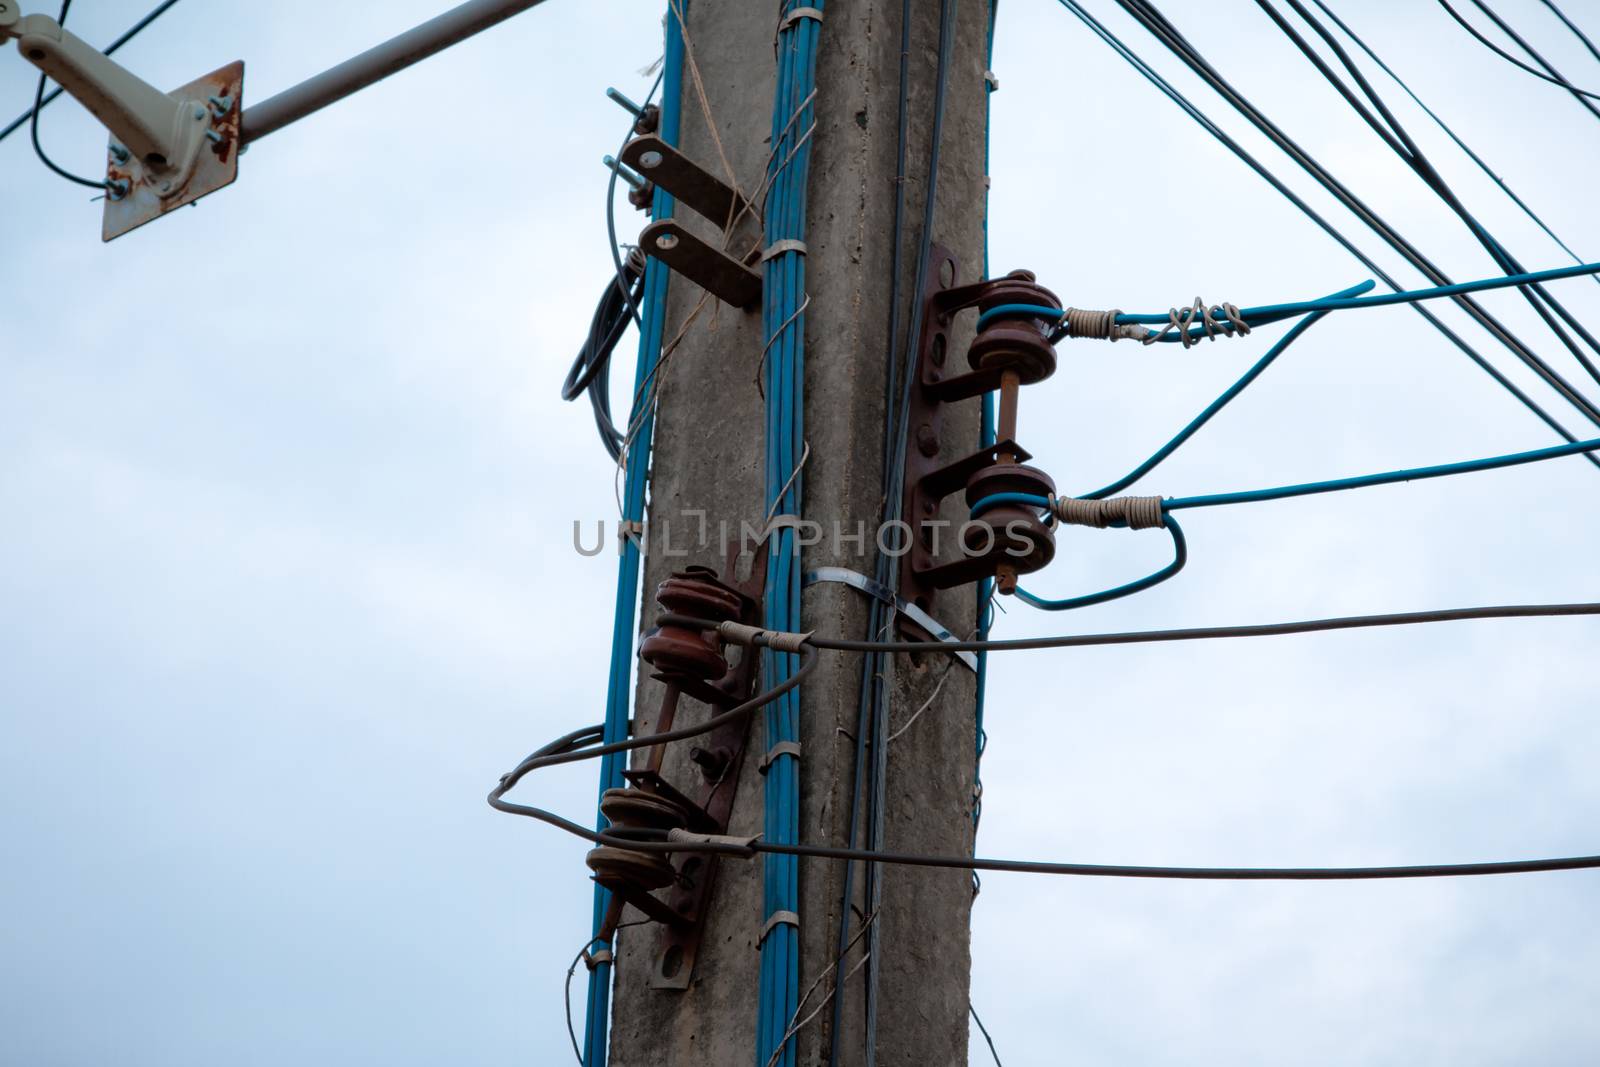 complicated arrangement of Thailand electric wire